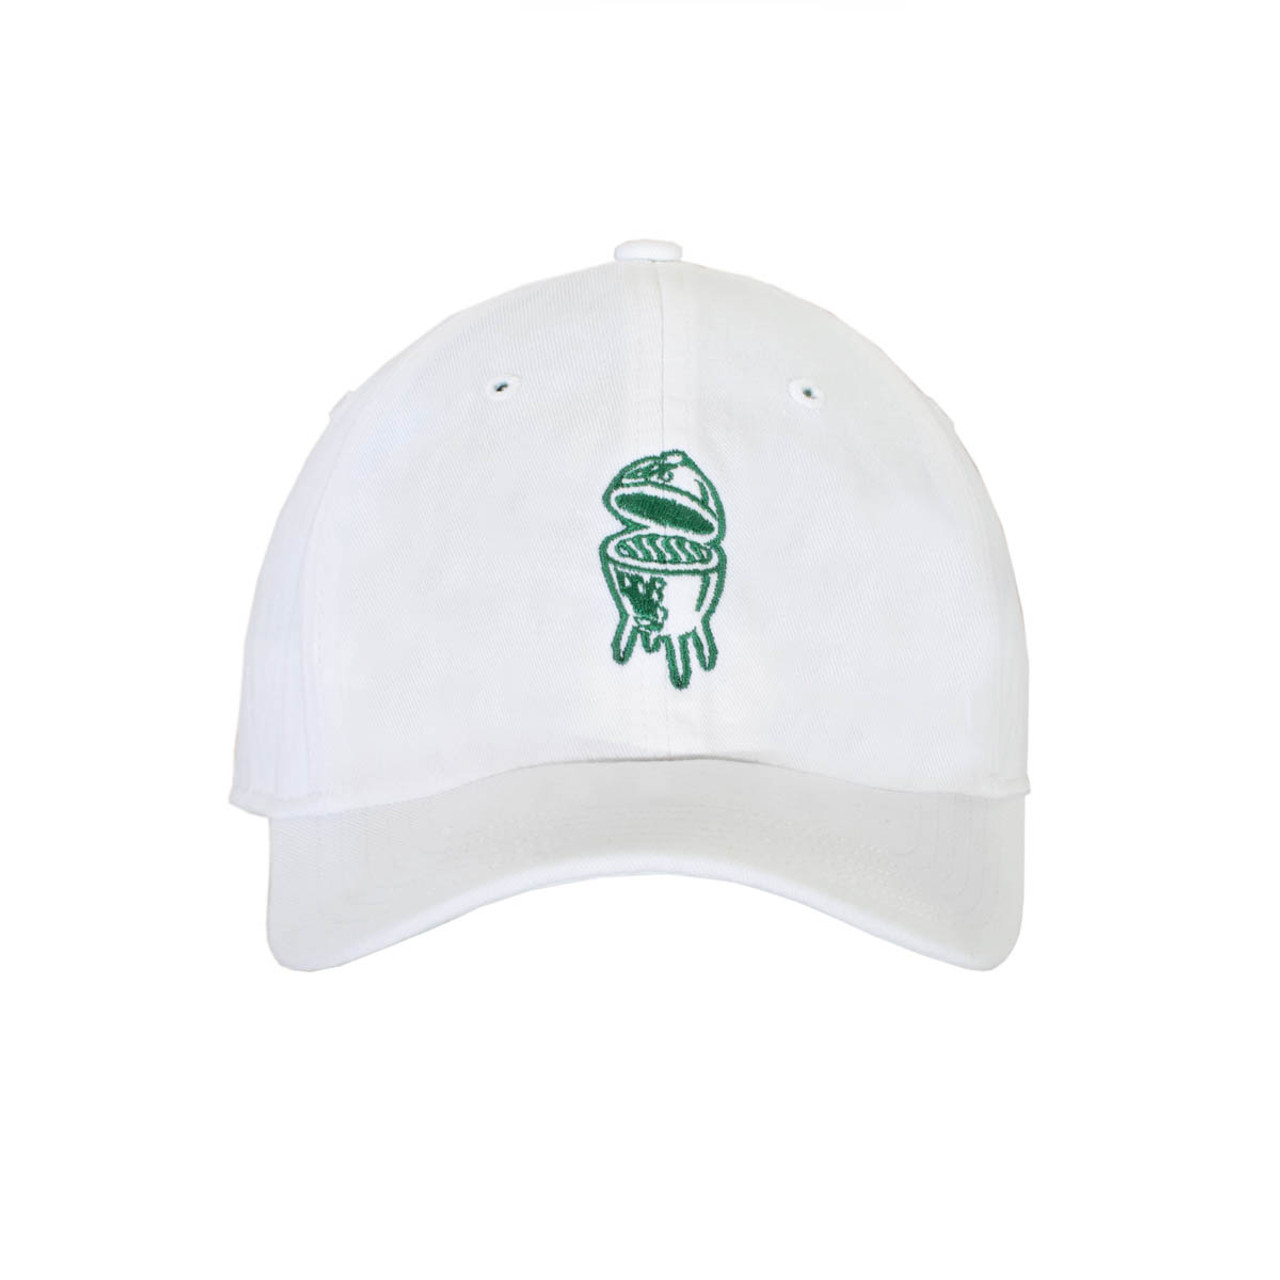 White Snapback Baseball Cap with Embroidered EGG